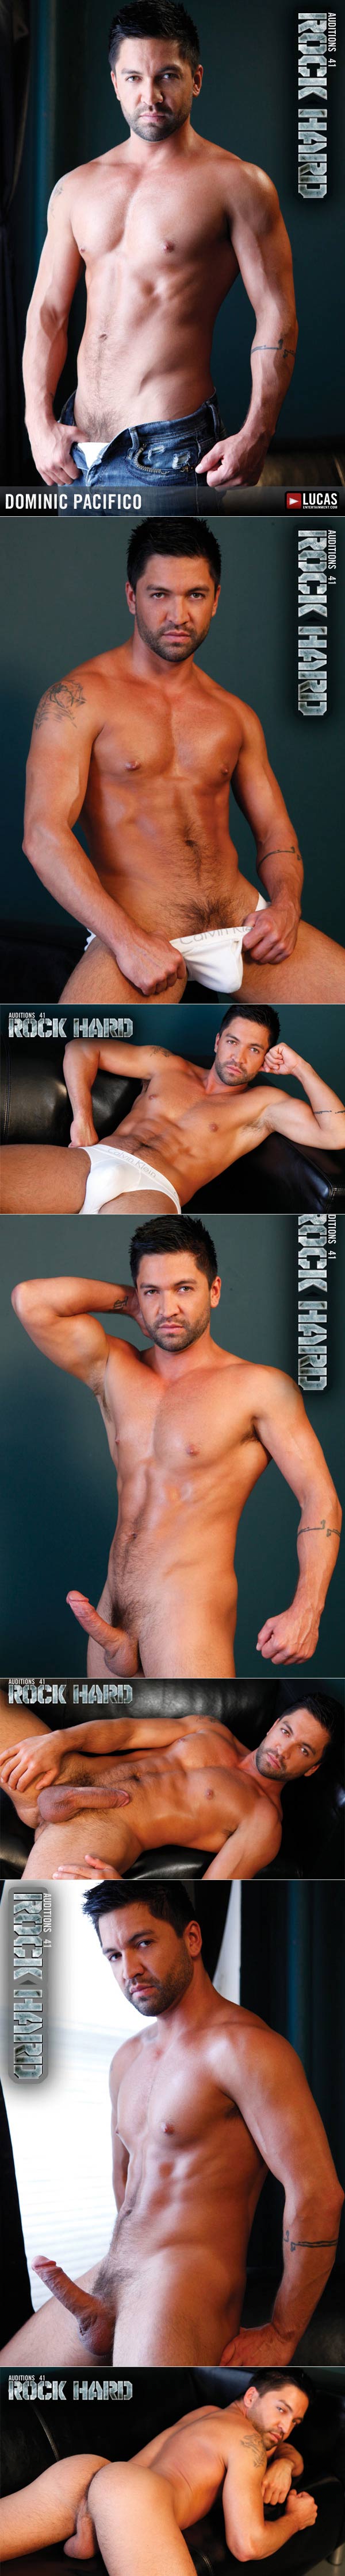 Rock Hard (Shay and Dominic Pacifico) at LucasEntertainment.com